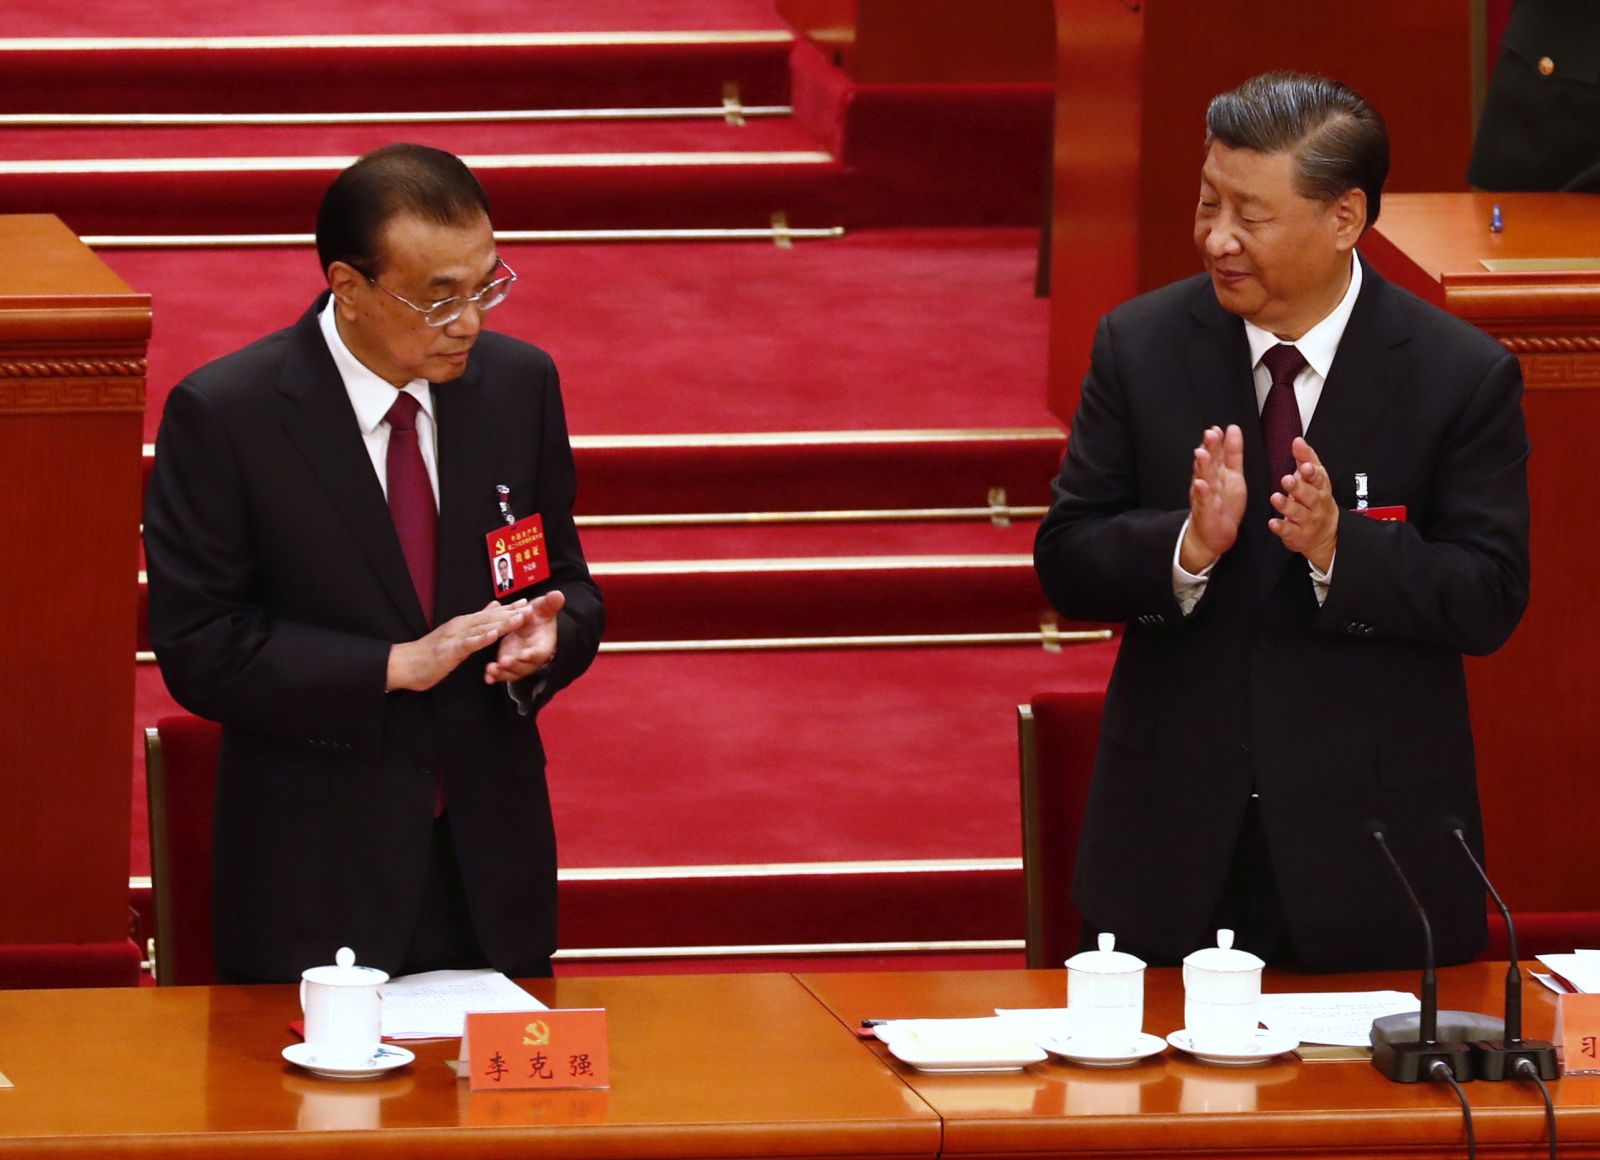 epa10258206 Chinese President Xi Jinping (R) and Premier Li Keqiang react during the closing ceremony of the 20th National Congress of the Communist Party of China (CPC) at the Great Hall of People in Beijing, China, 22 October 2022. The 20th National Congress of the Communist Party of China will close on 22 October with President Xi Jinping expected to secure a historic third five-year term in power.  EPA/WU HAO